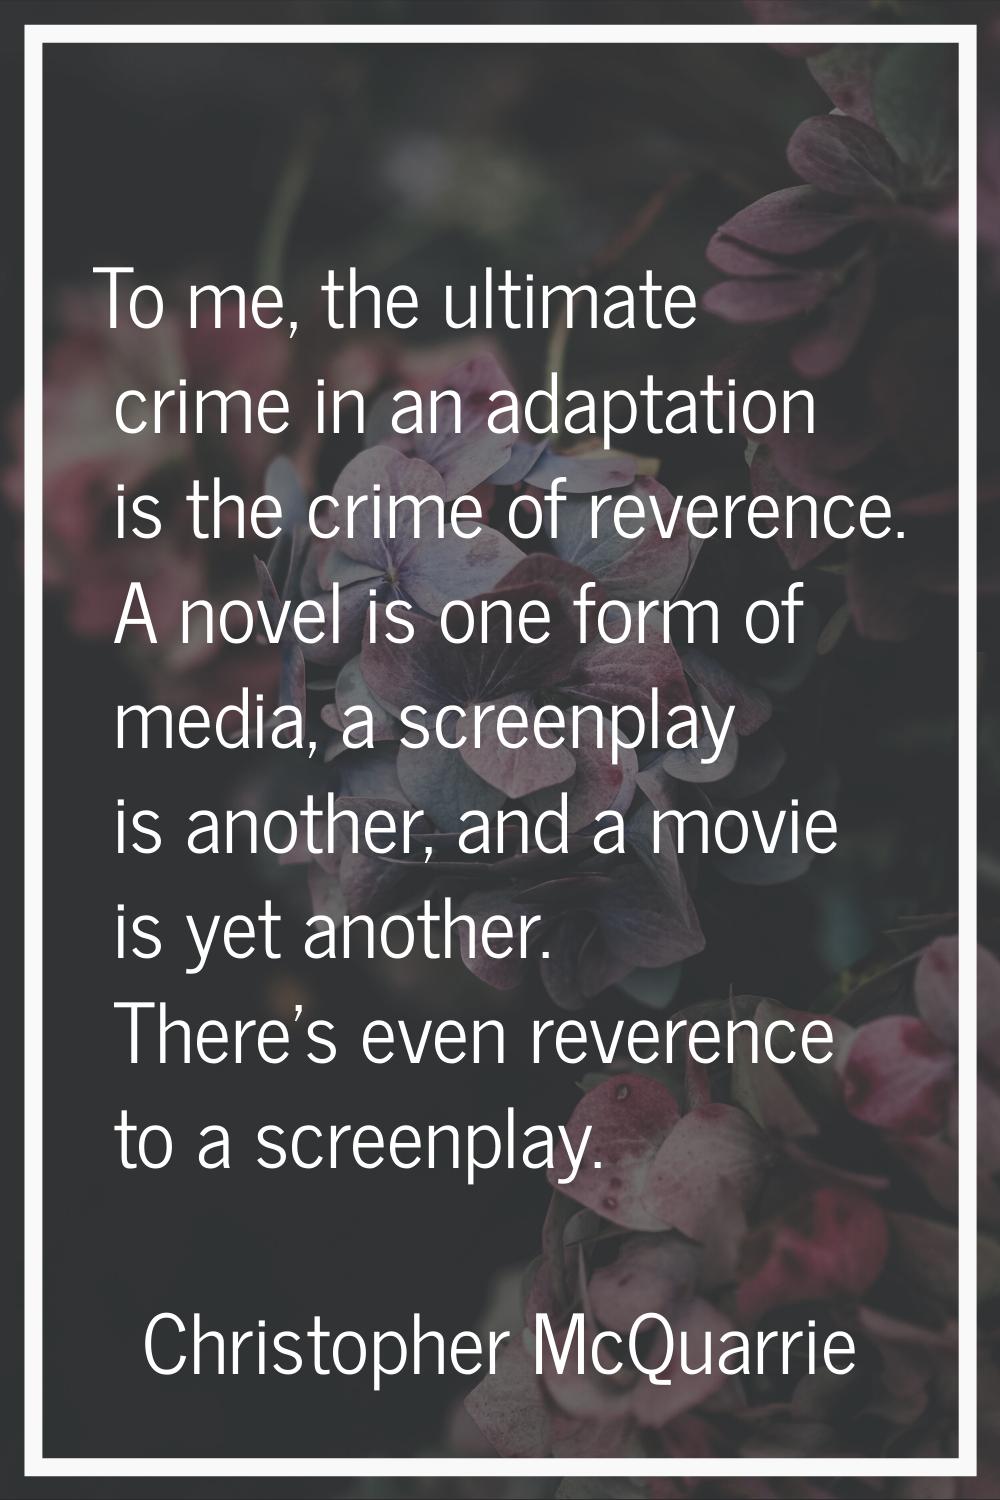 To me, the ultimate crime in an adaptation is the crime of reverence. A novel is one form of media,